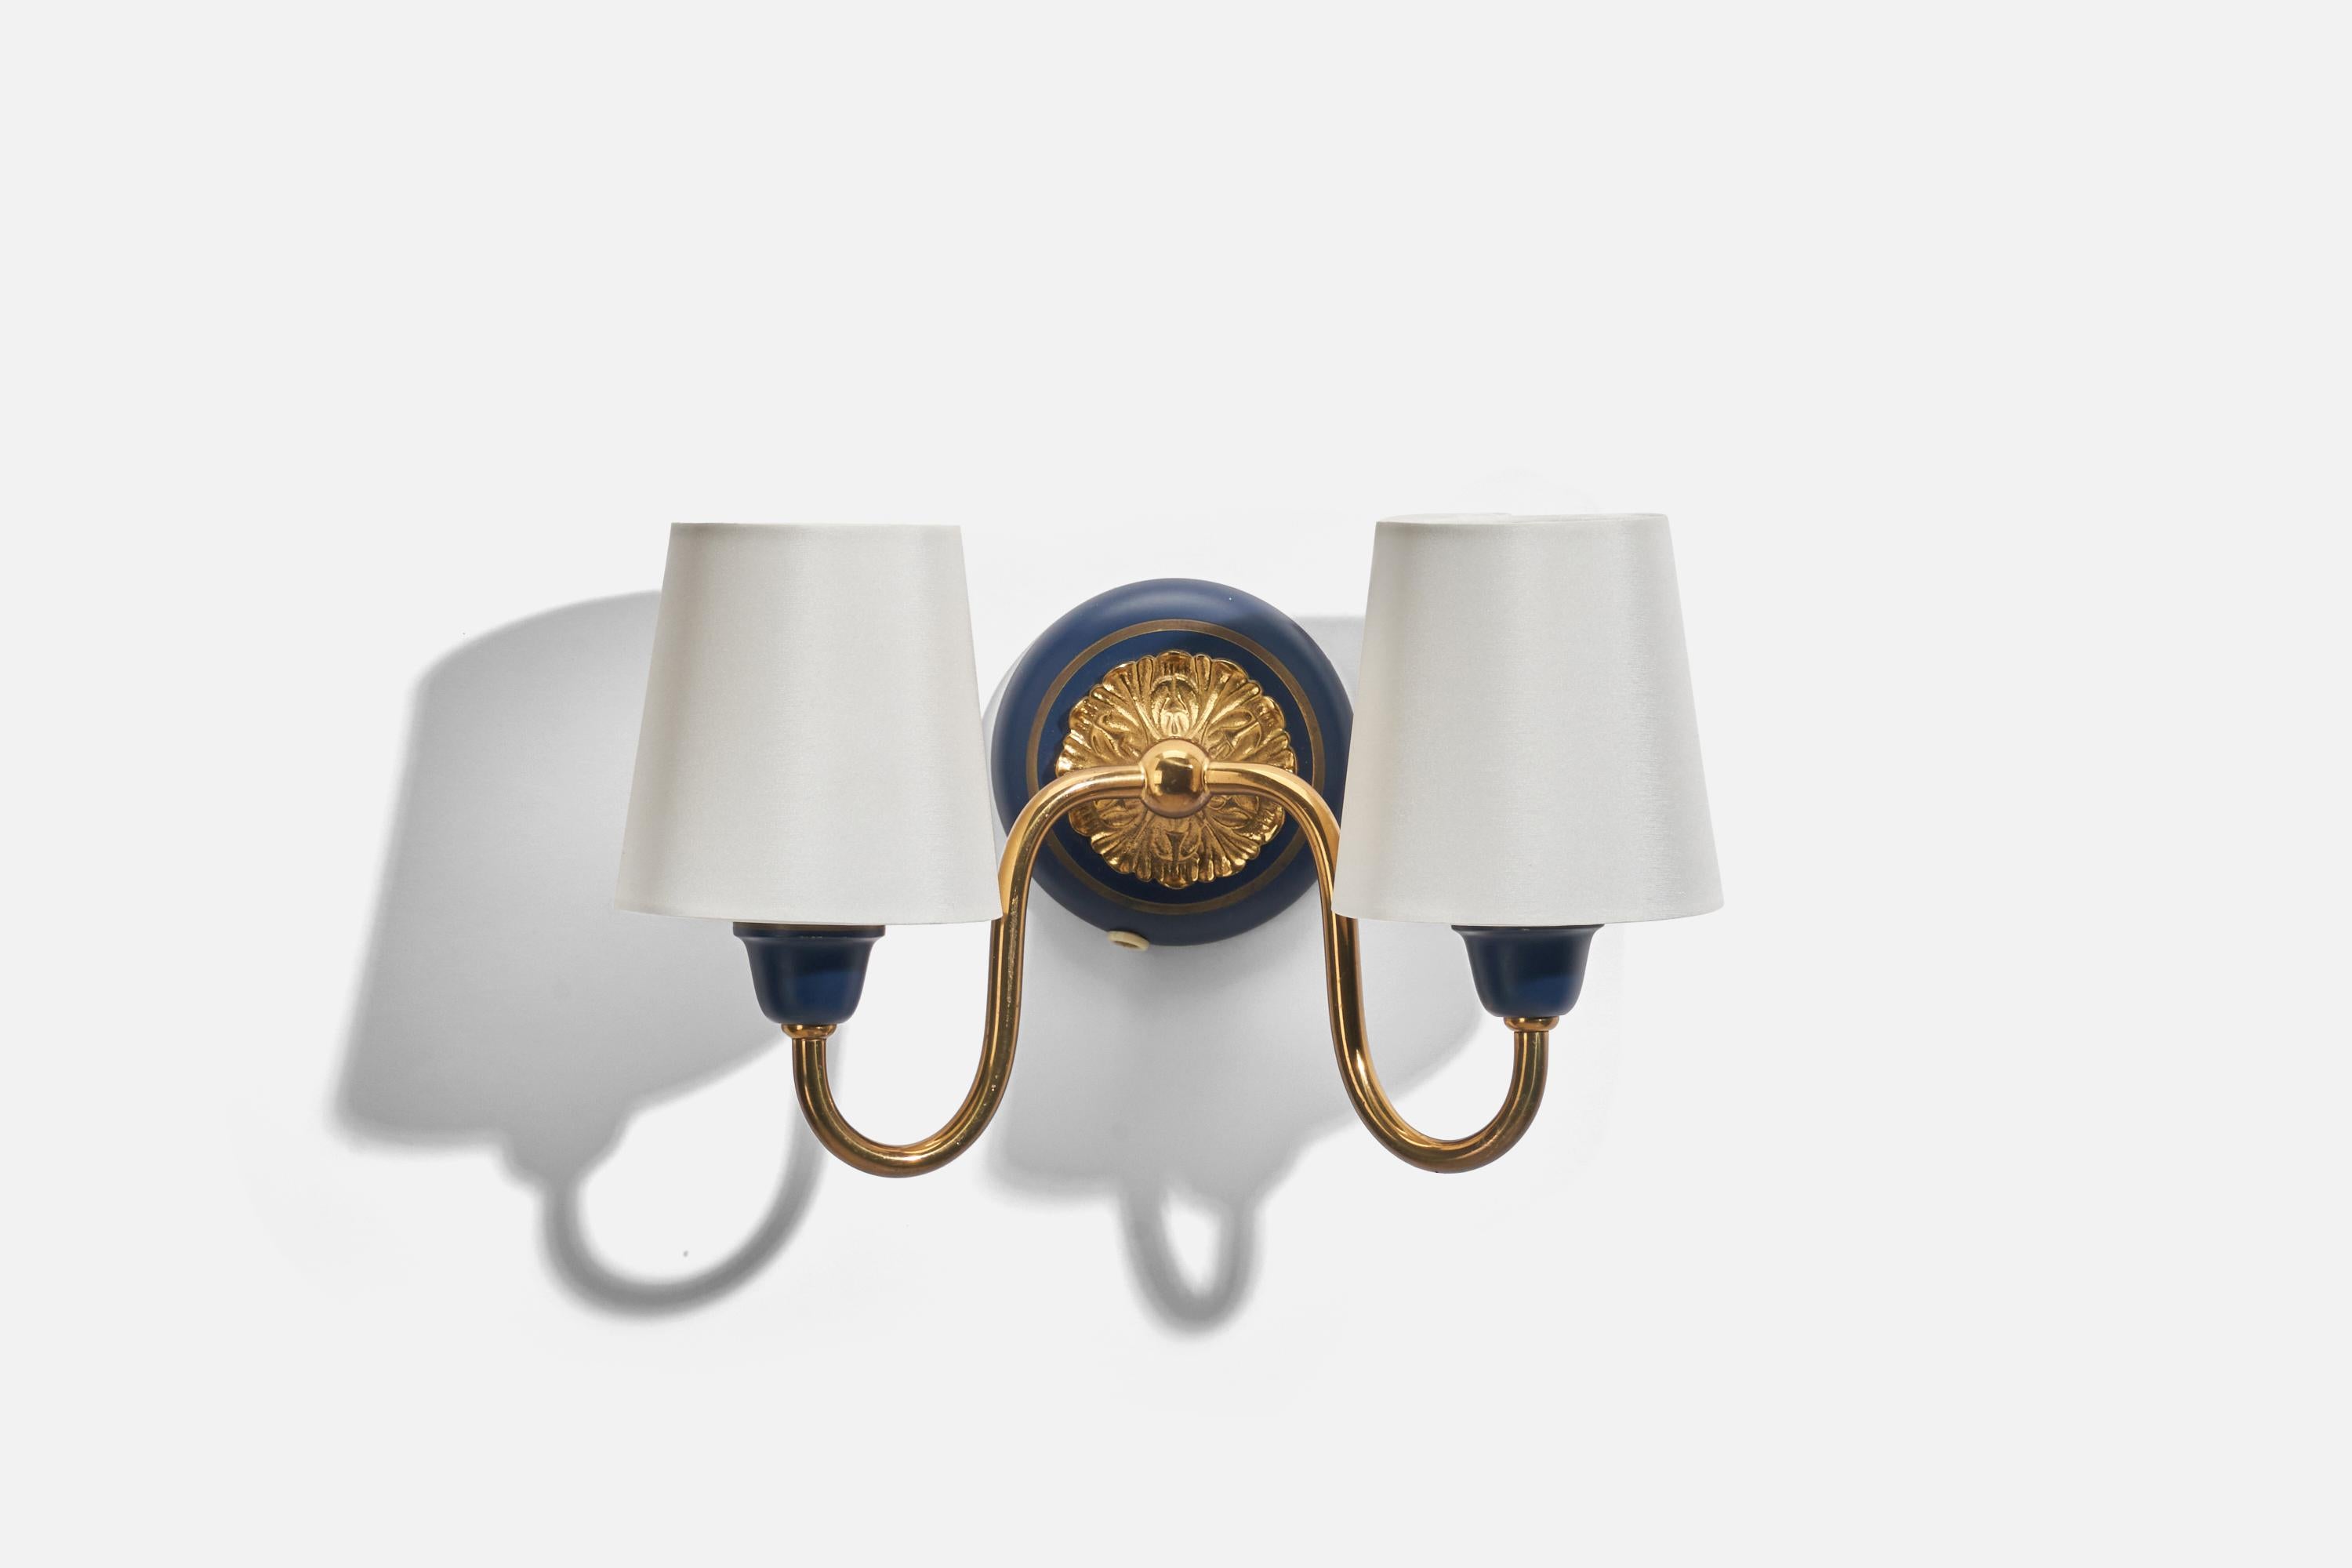 A pair of blue lacquered metal, brass and fabric sconces designed and produced in Sweden, 1950s. 

Sold with Lampshades. Dimensions stated are of Sconces with Lampshades.

Dimensions of Back Plate (inches) : 4 x 4 x 0.65 (Height x Width x